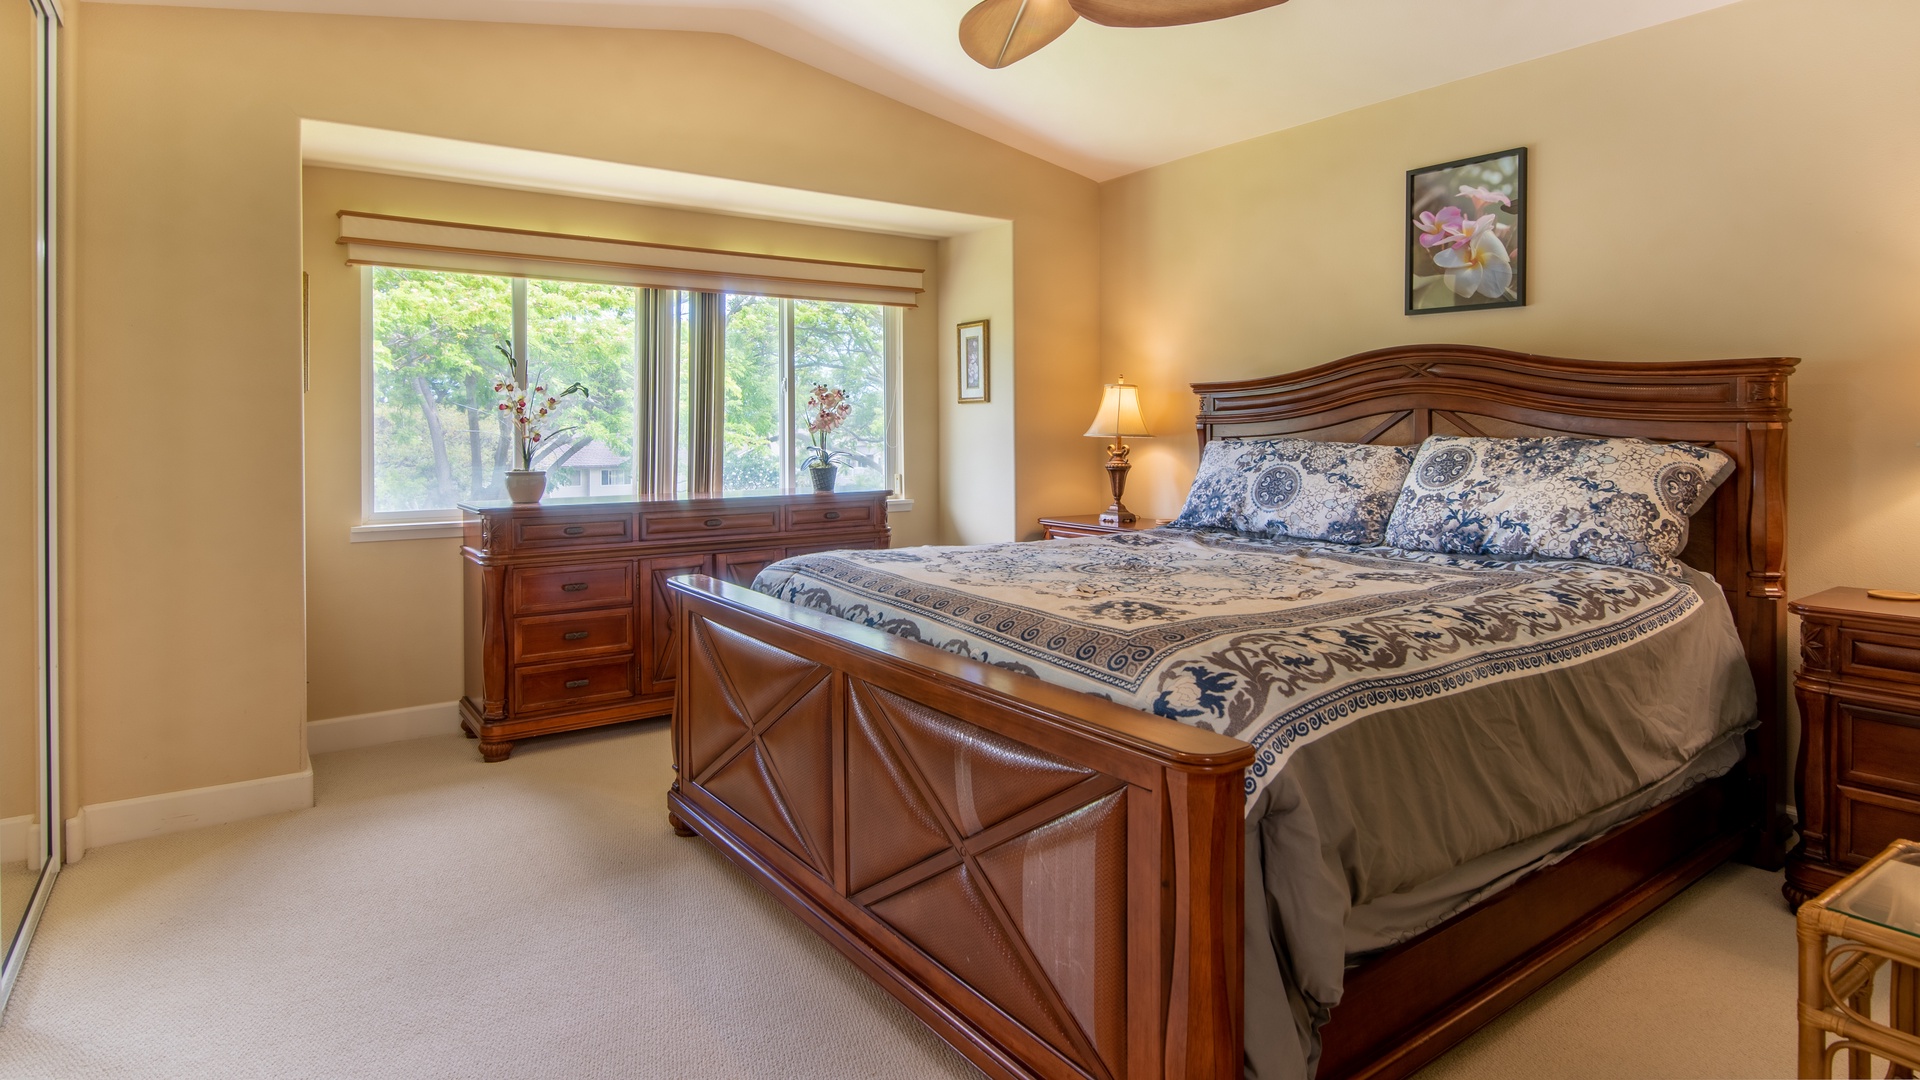 Kapolei Vacation Rentals, Hillside Villas 1538-2 - The primary guest bedroom with a dresser and views.